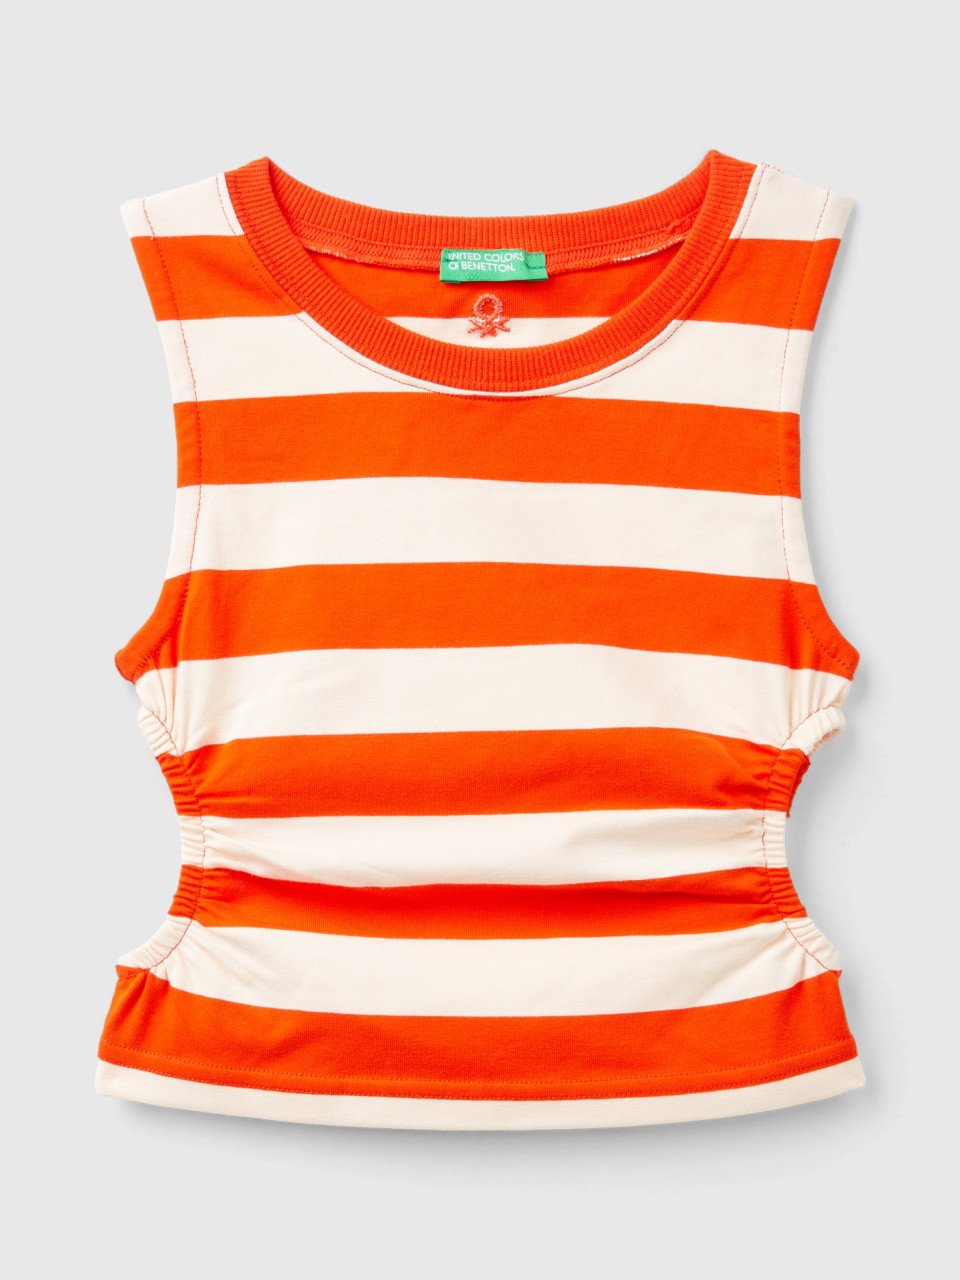 Benetton, Striped Top With Porthole, Multi-color, Kids